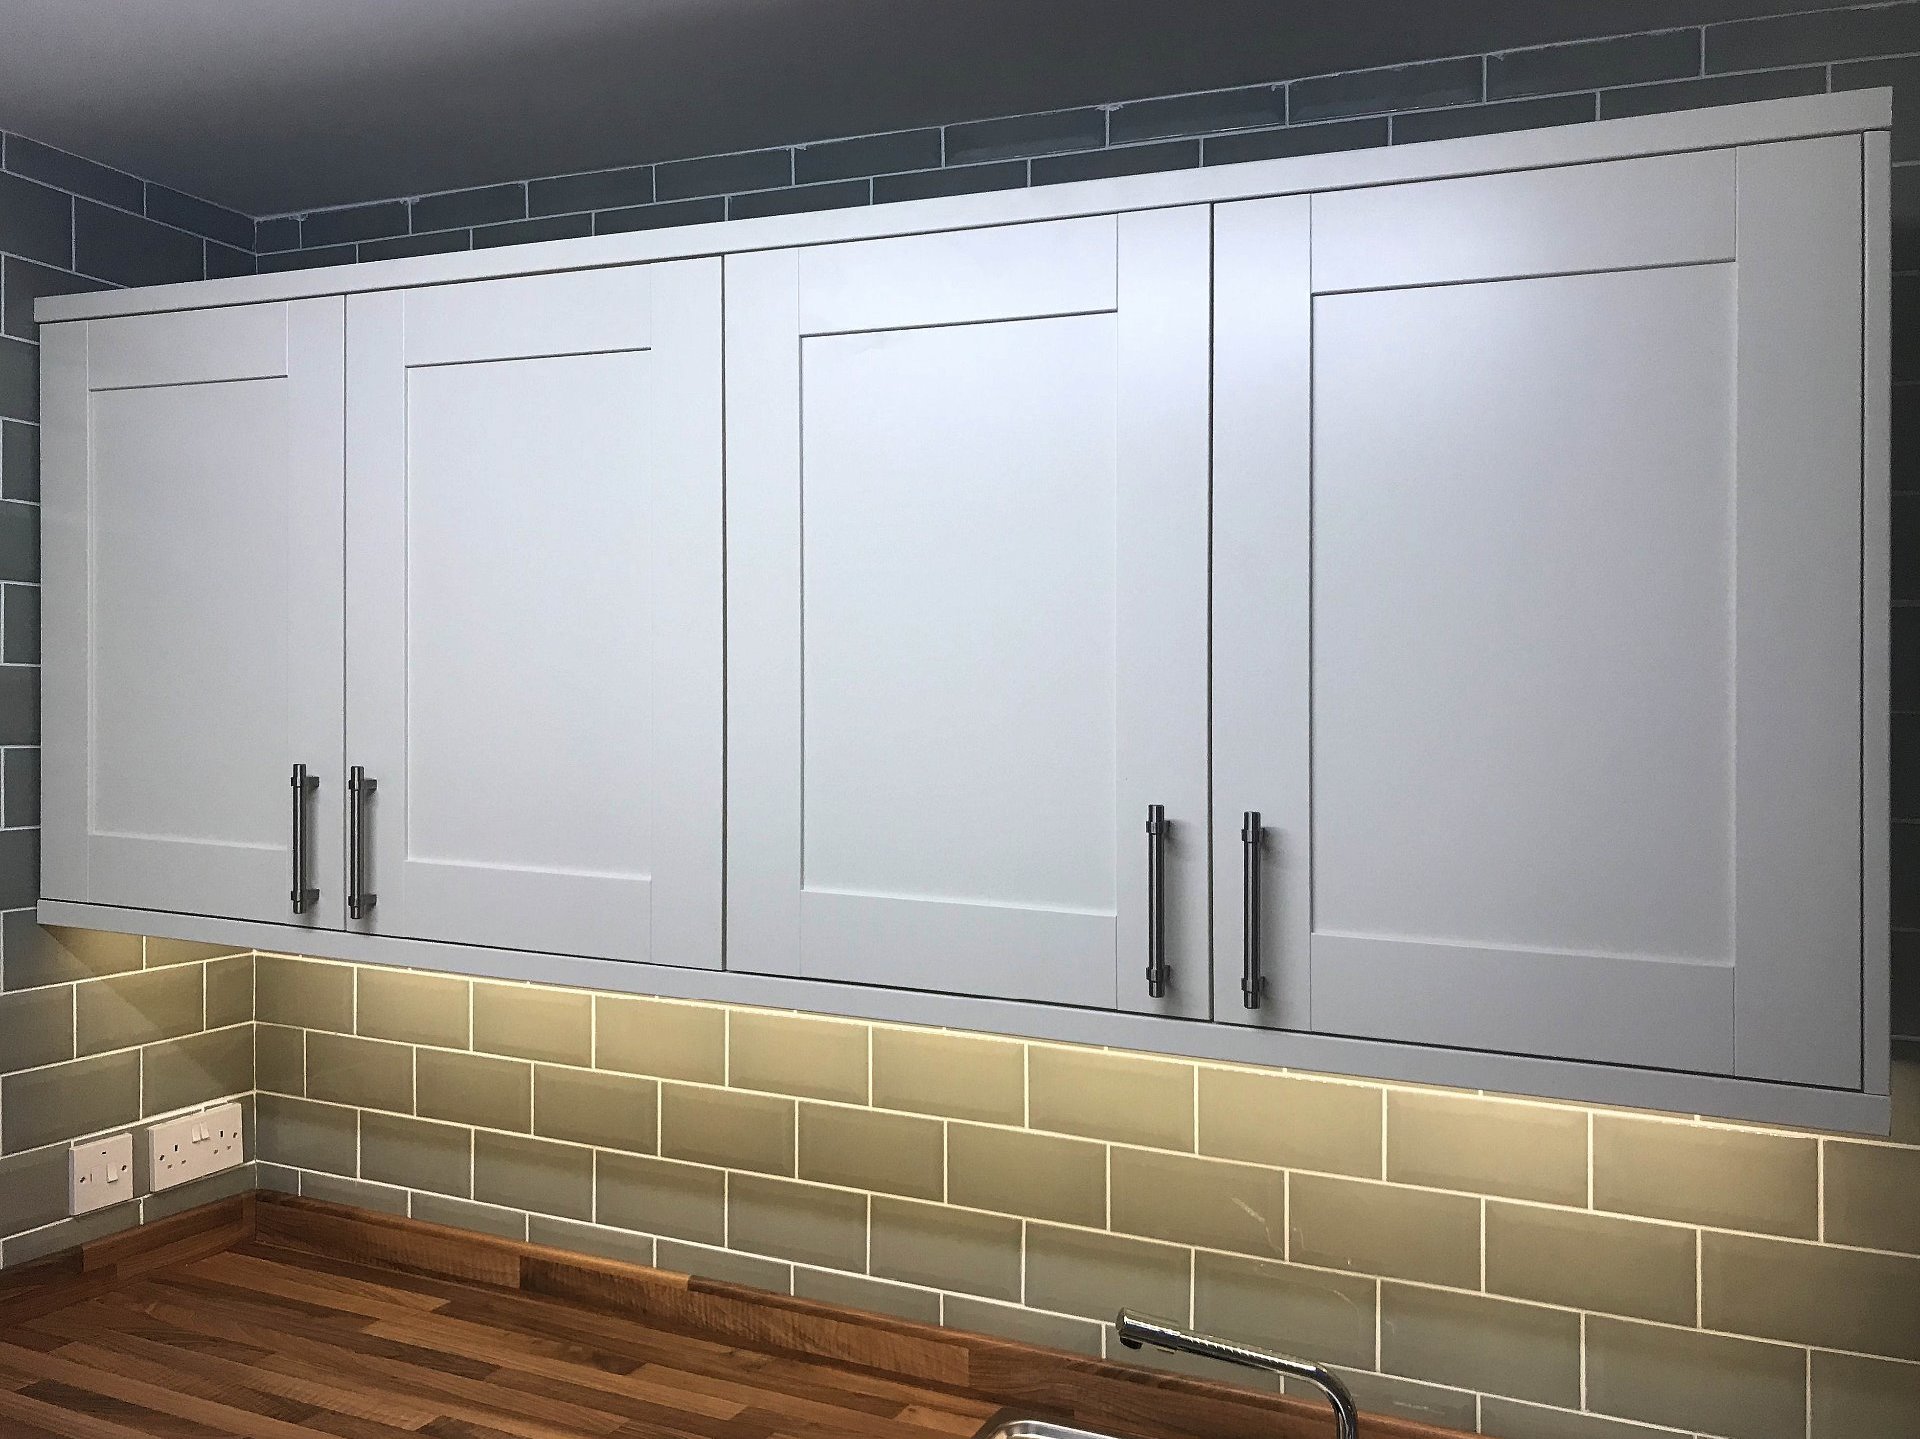 Bank of wall hung cabinet units with under pelmet led lighting part of kitchen installation. Barnstaple Devon